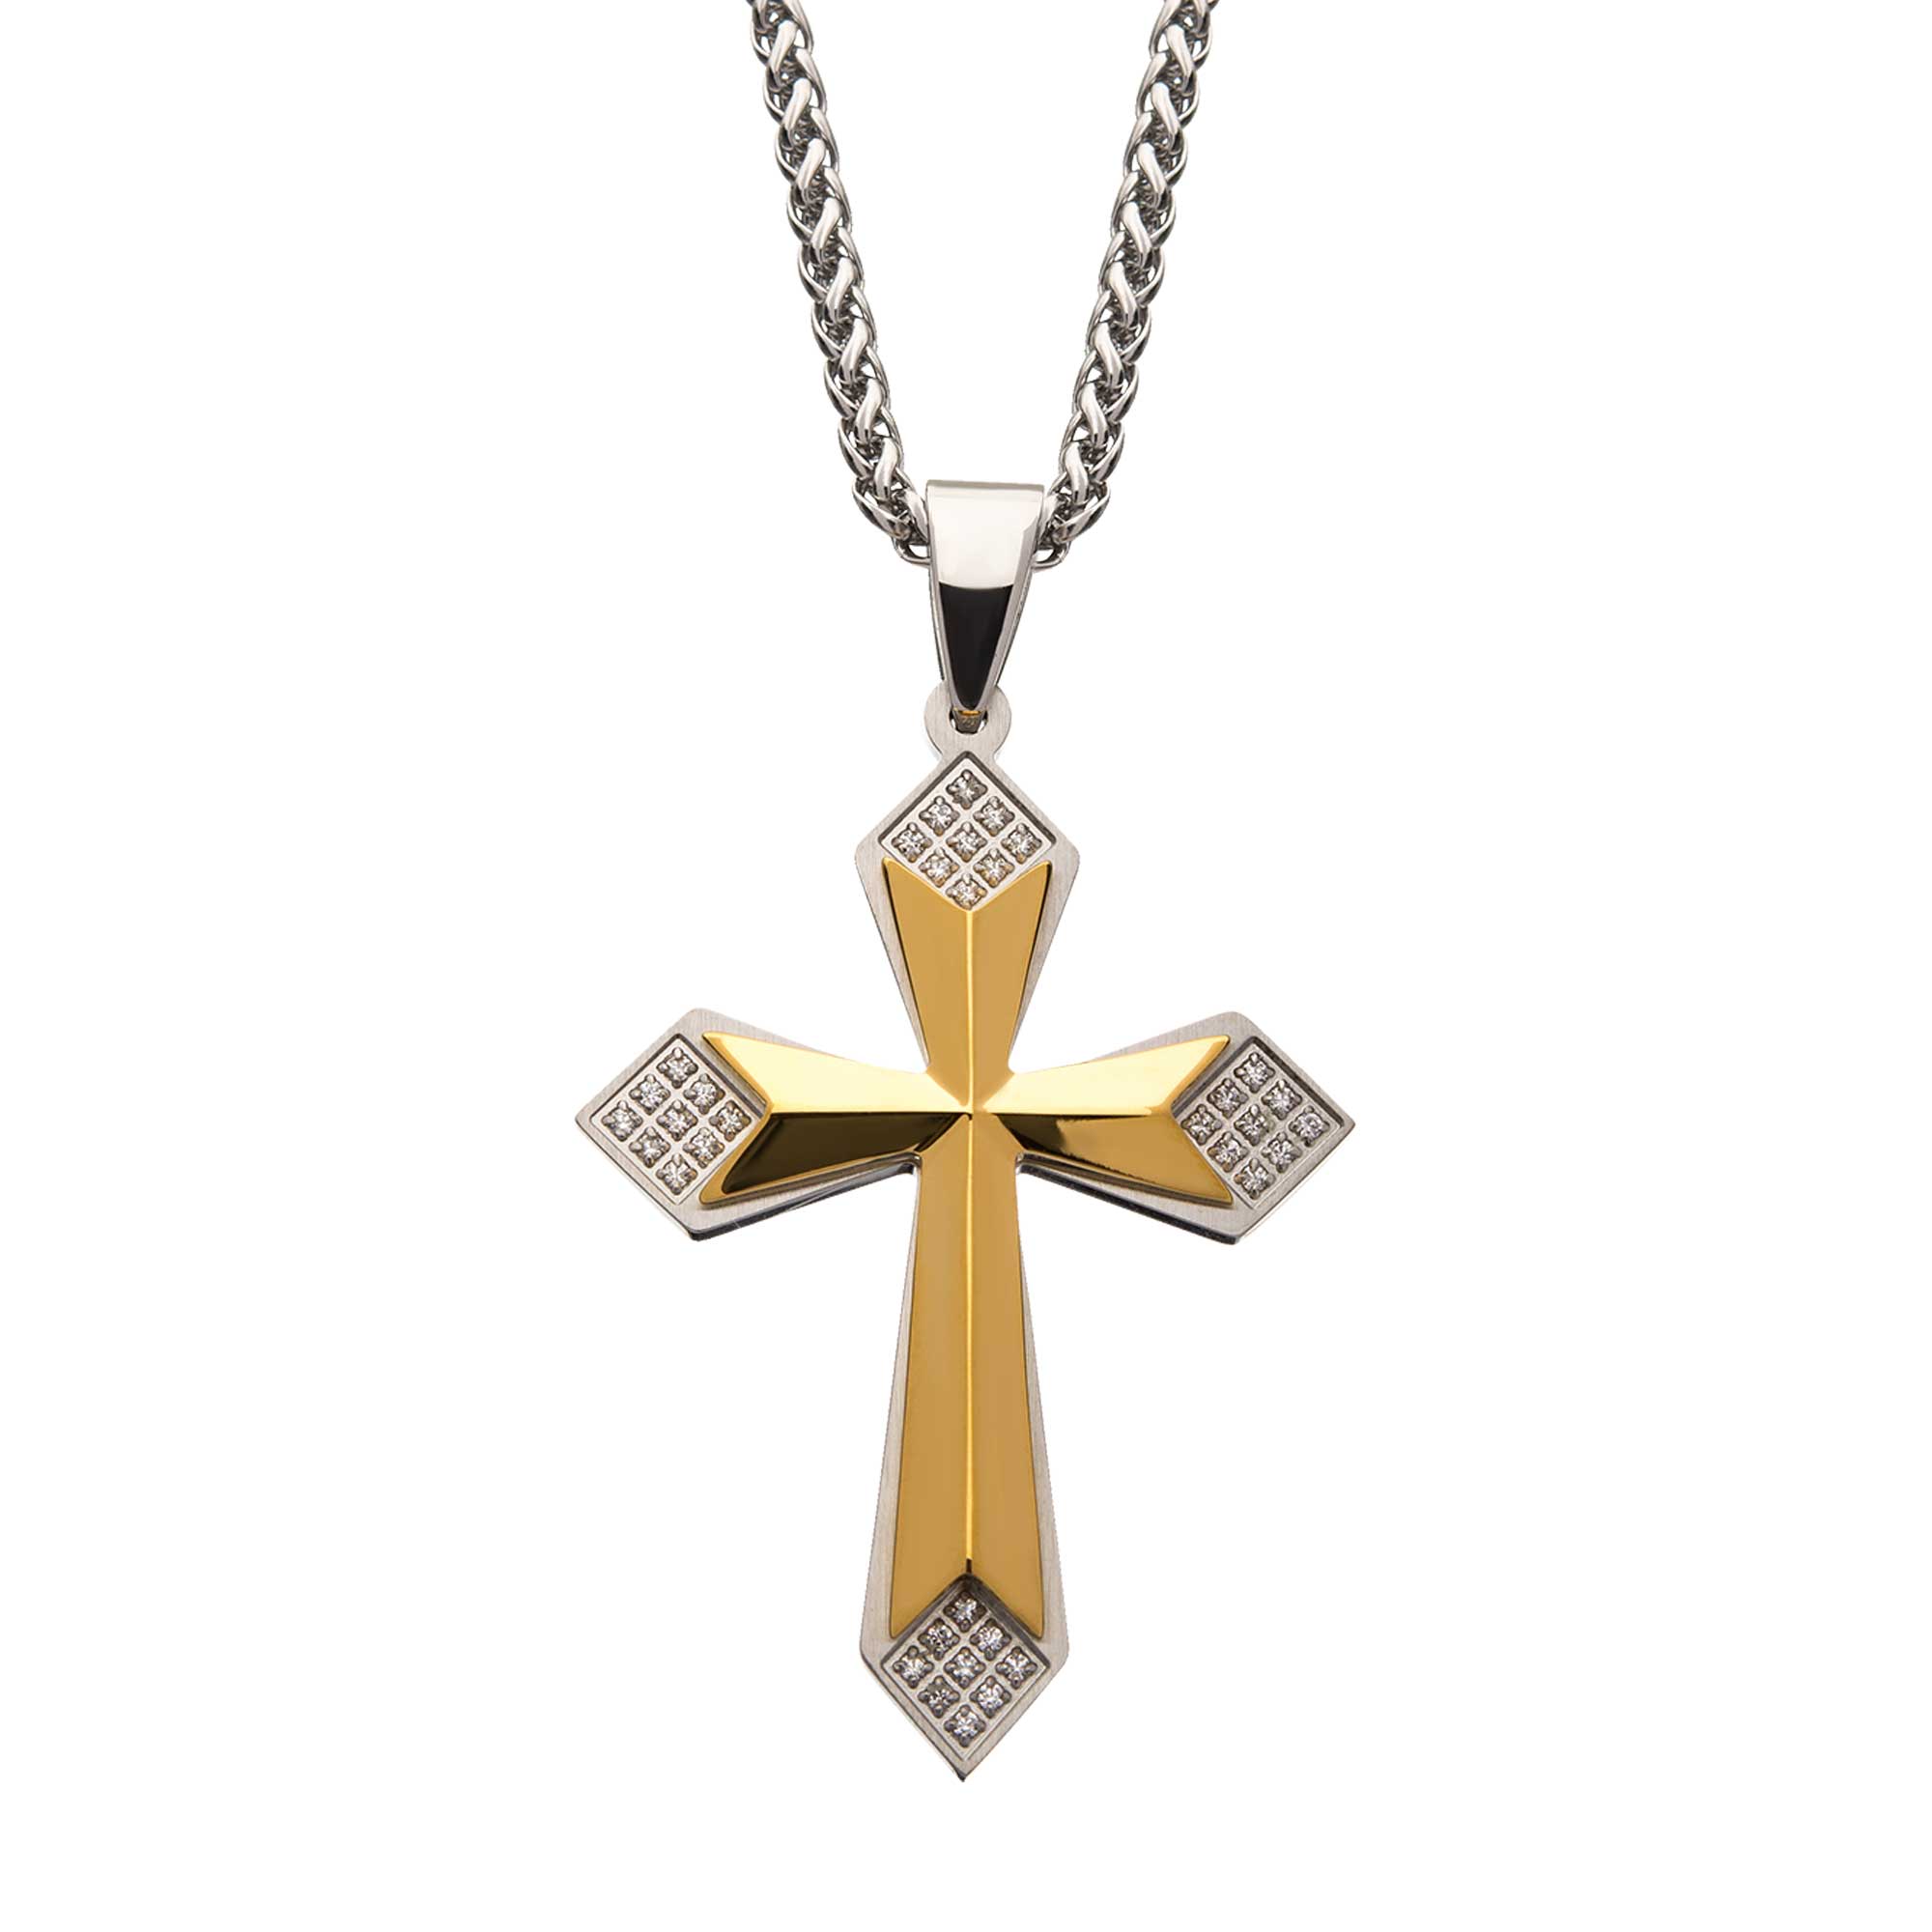 Gold Plated Cross with 36pcs CNC Prong Set Clear CZ Pendant with Steel Wheat Chain P.K. Bennett Jewelers Mundelein, IL